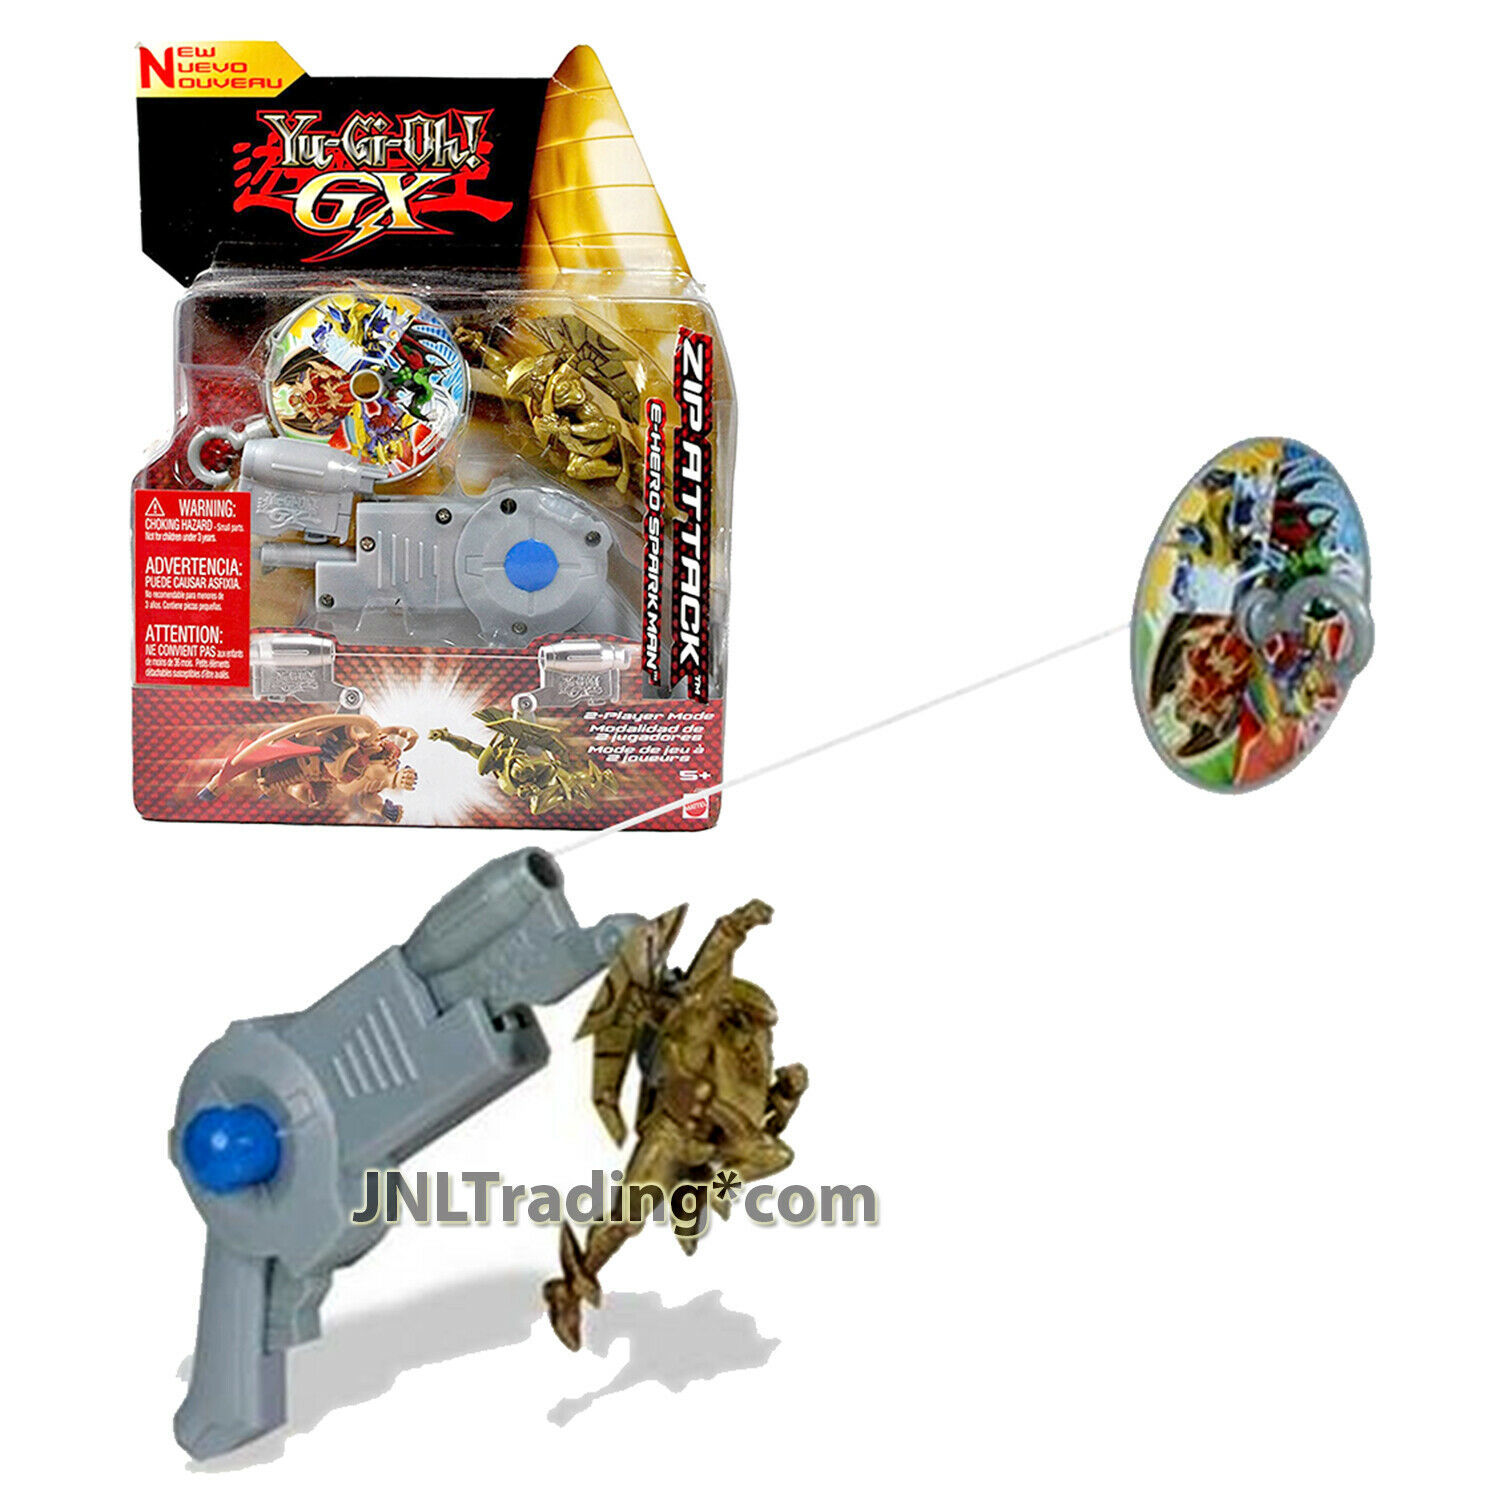 Primary image for Yr 2005 Yu-Gi-Oh! Zip Attack 4.5" Figure E-HERO SPARKMAN with Zip Line Gun, Disc